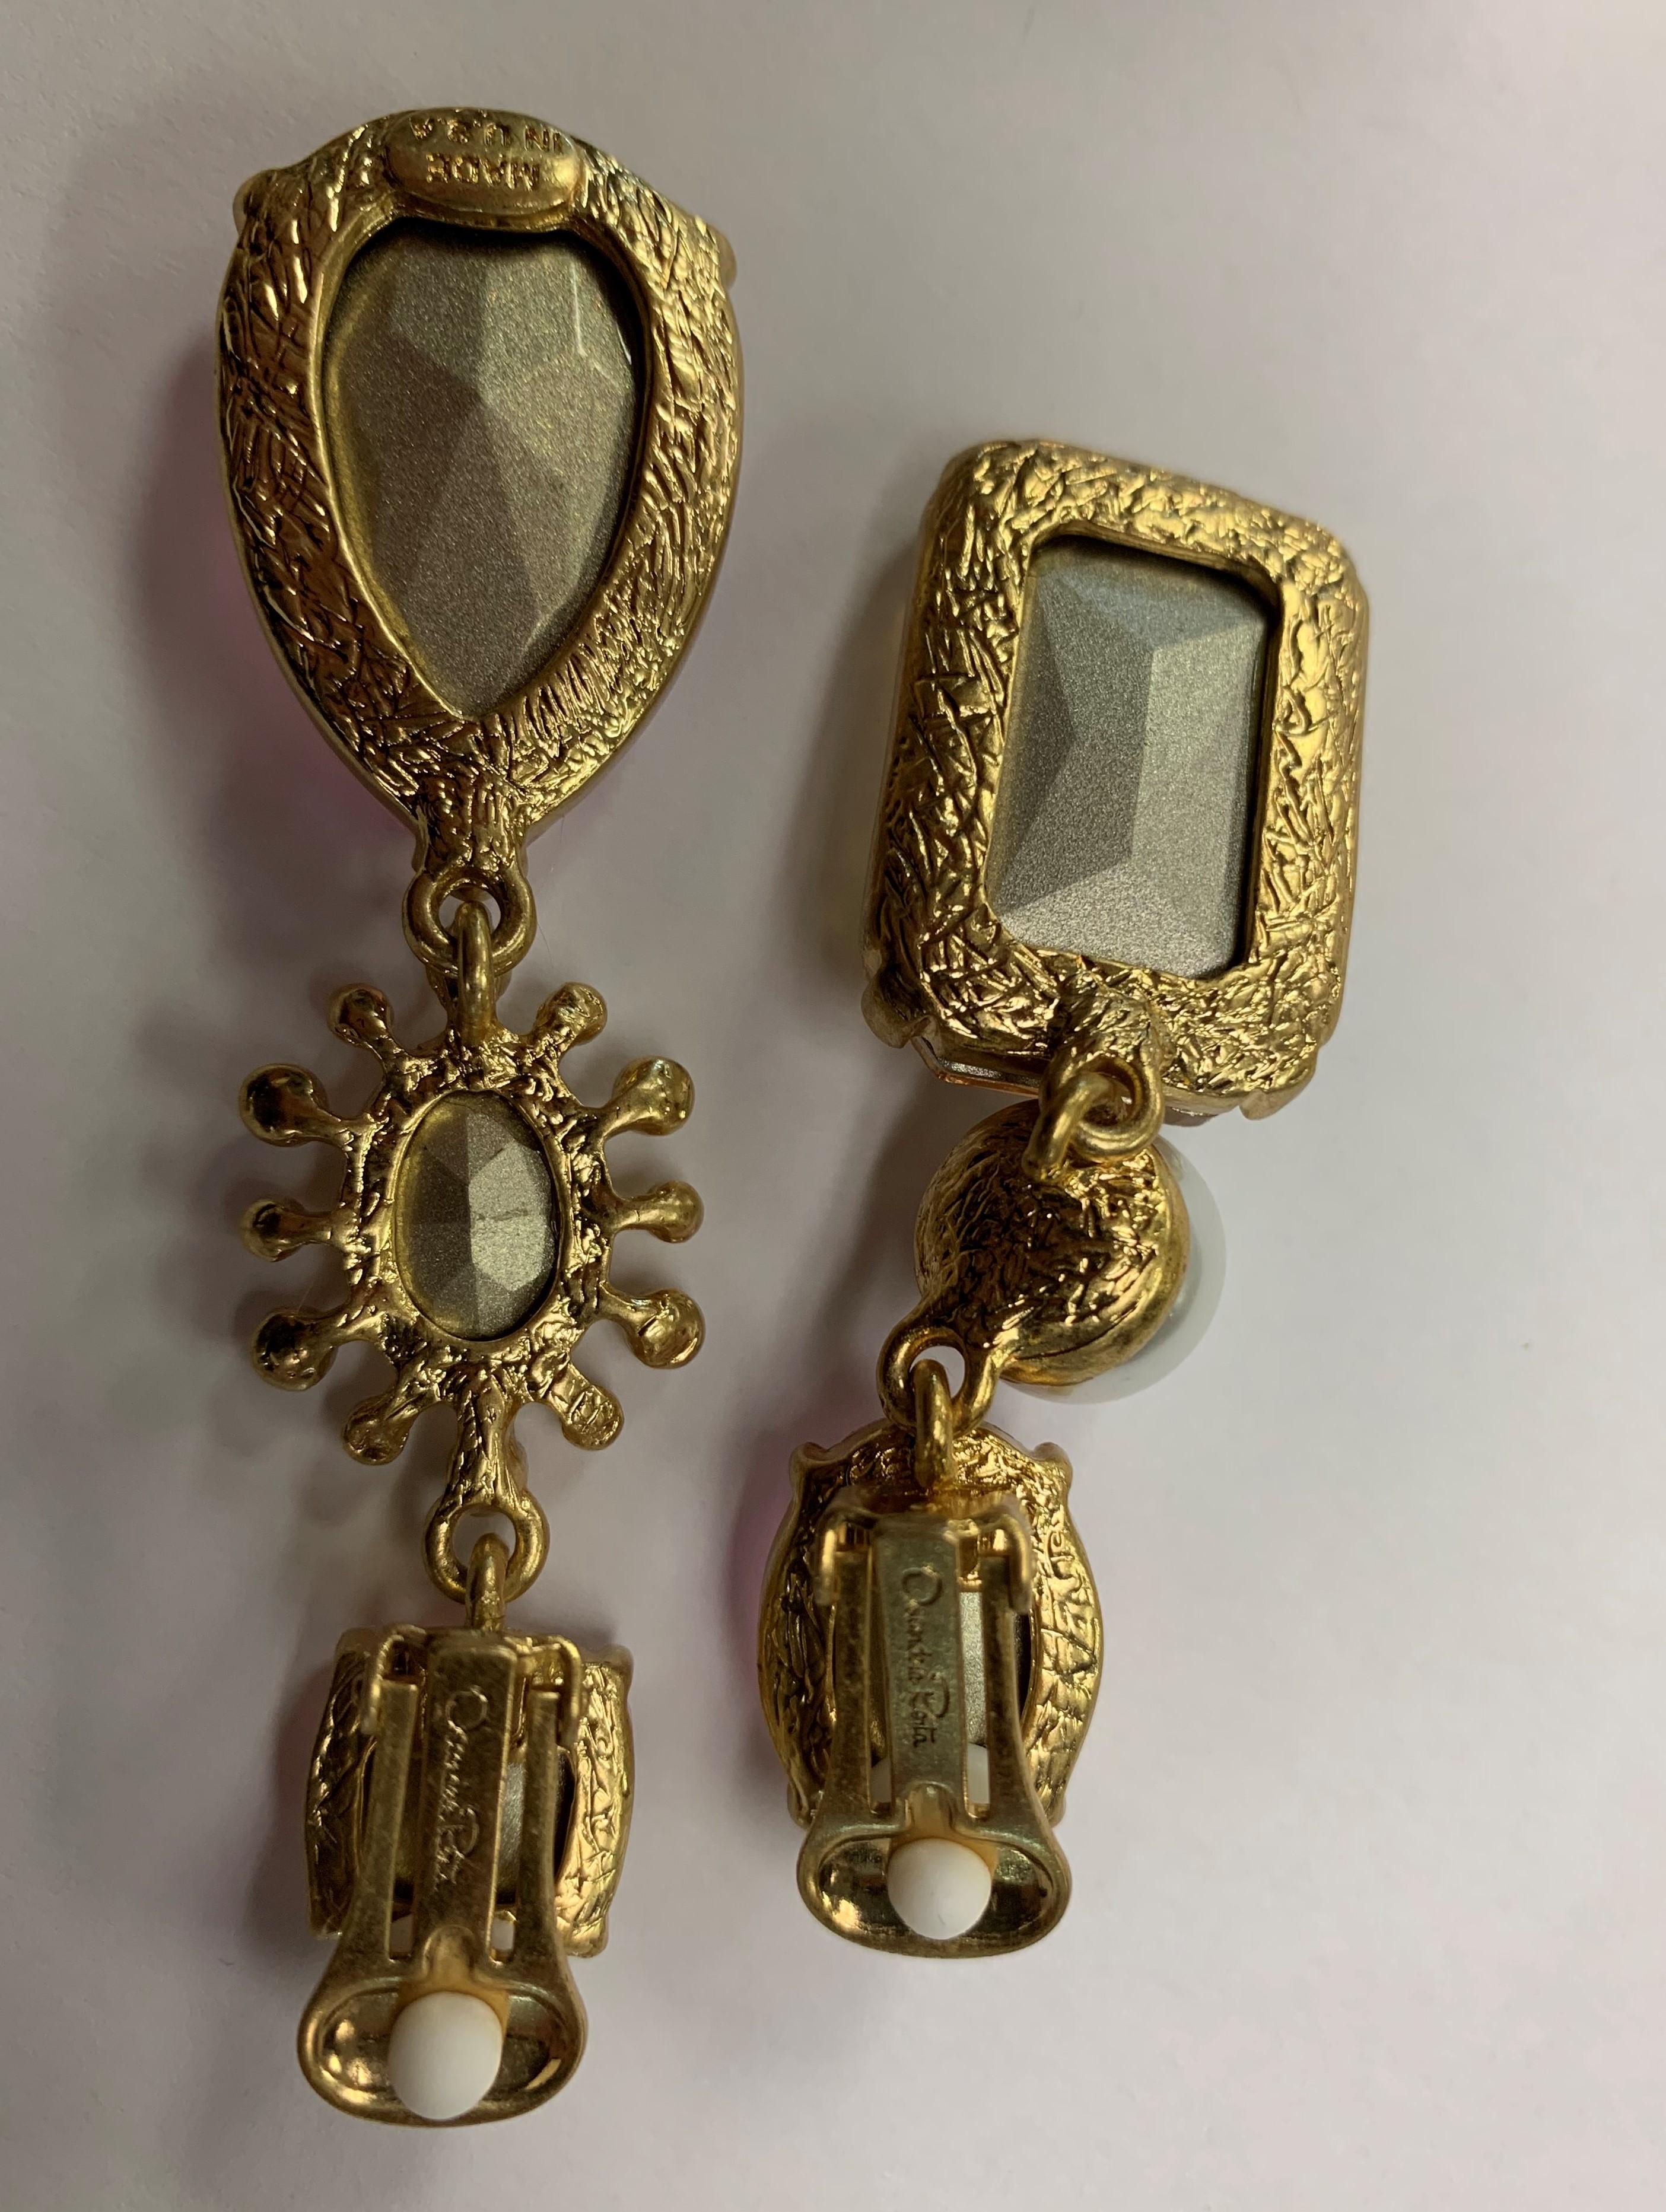 Oscar De La Renta Faux Pearls and Pink Crystals Runway Necklace and Earrings In Excellent Condition For Sale In Montreal, QC